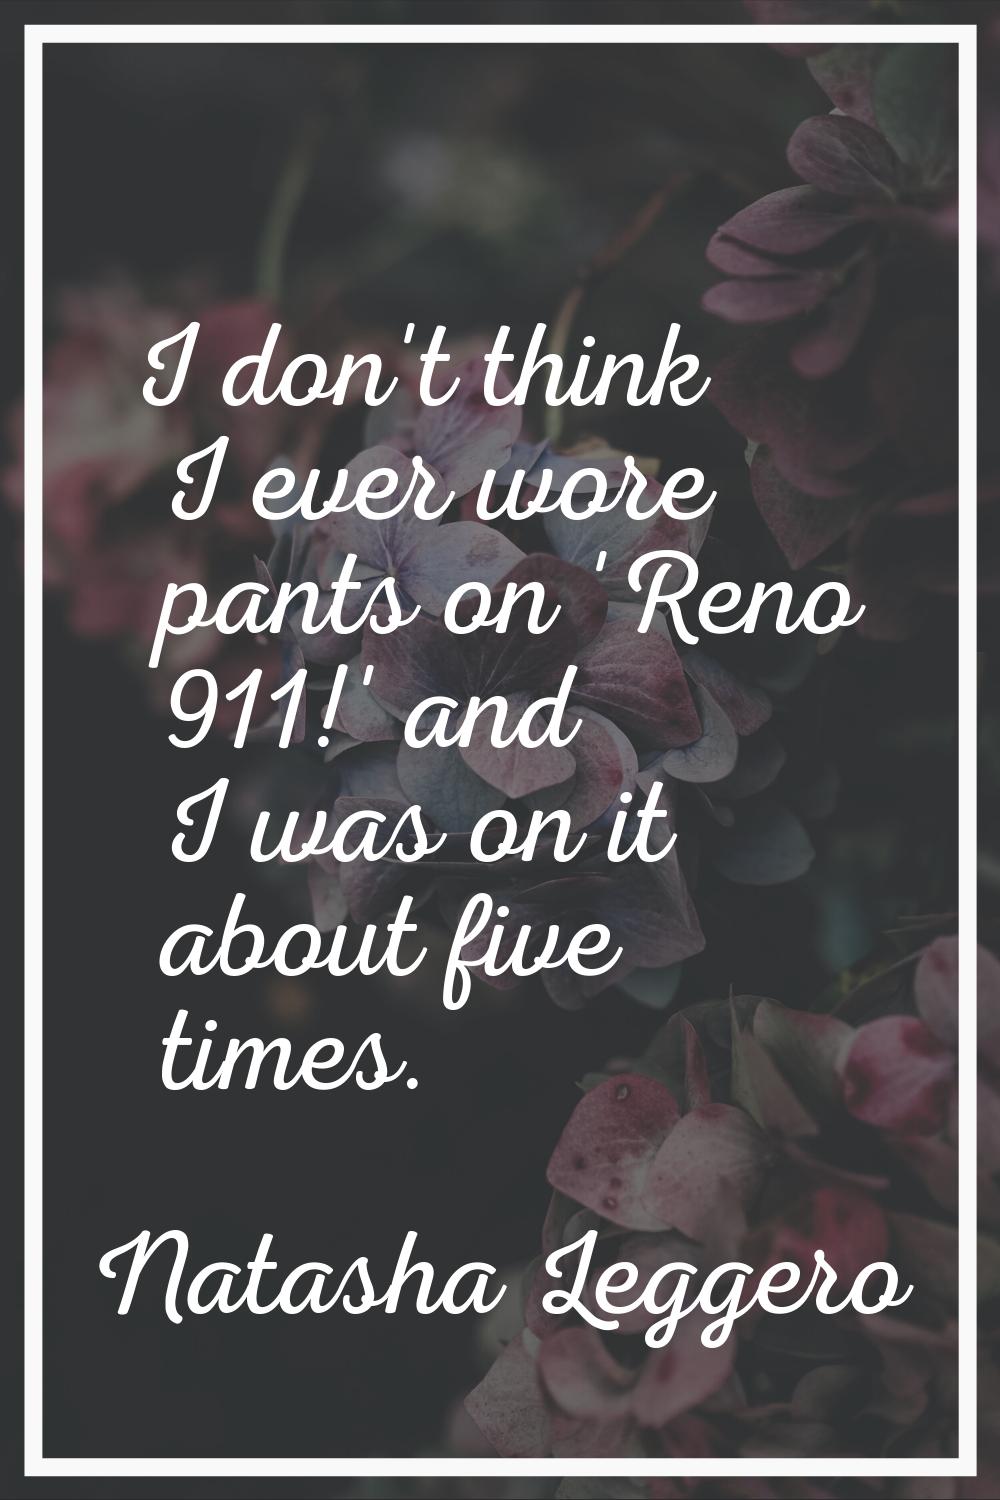 I don't think I ever wore pants on 'Reno 911!' and I was on it about five times.